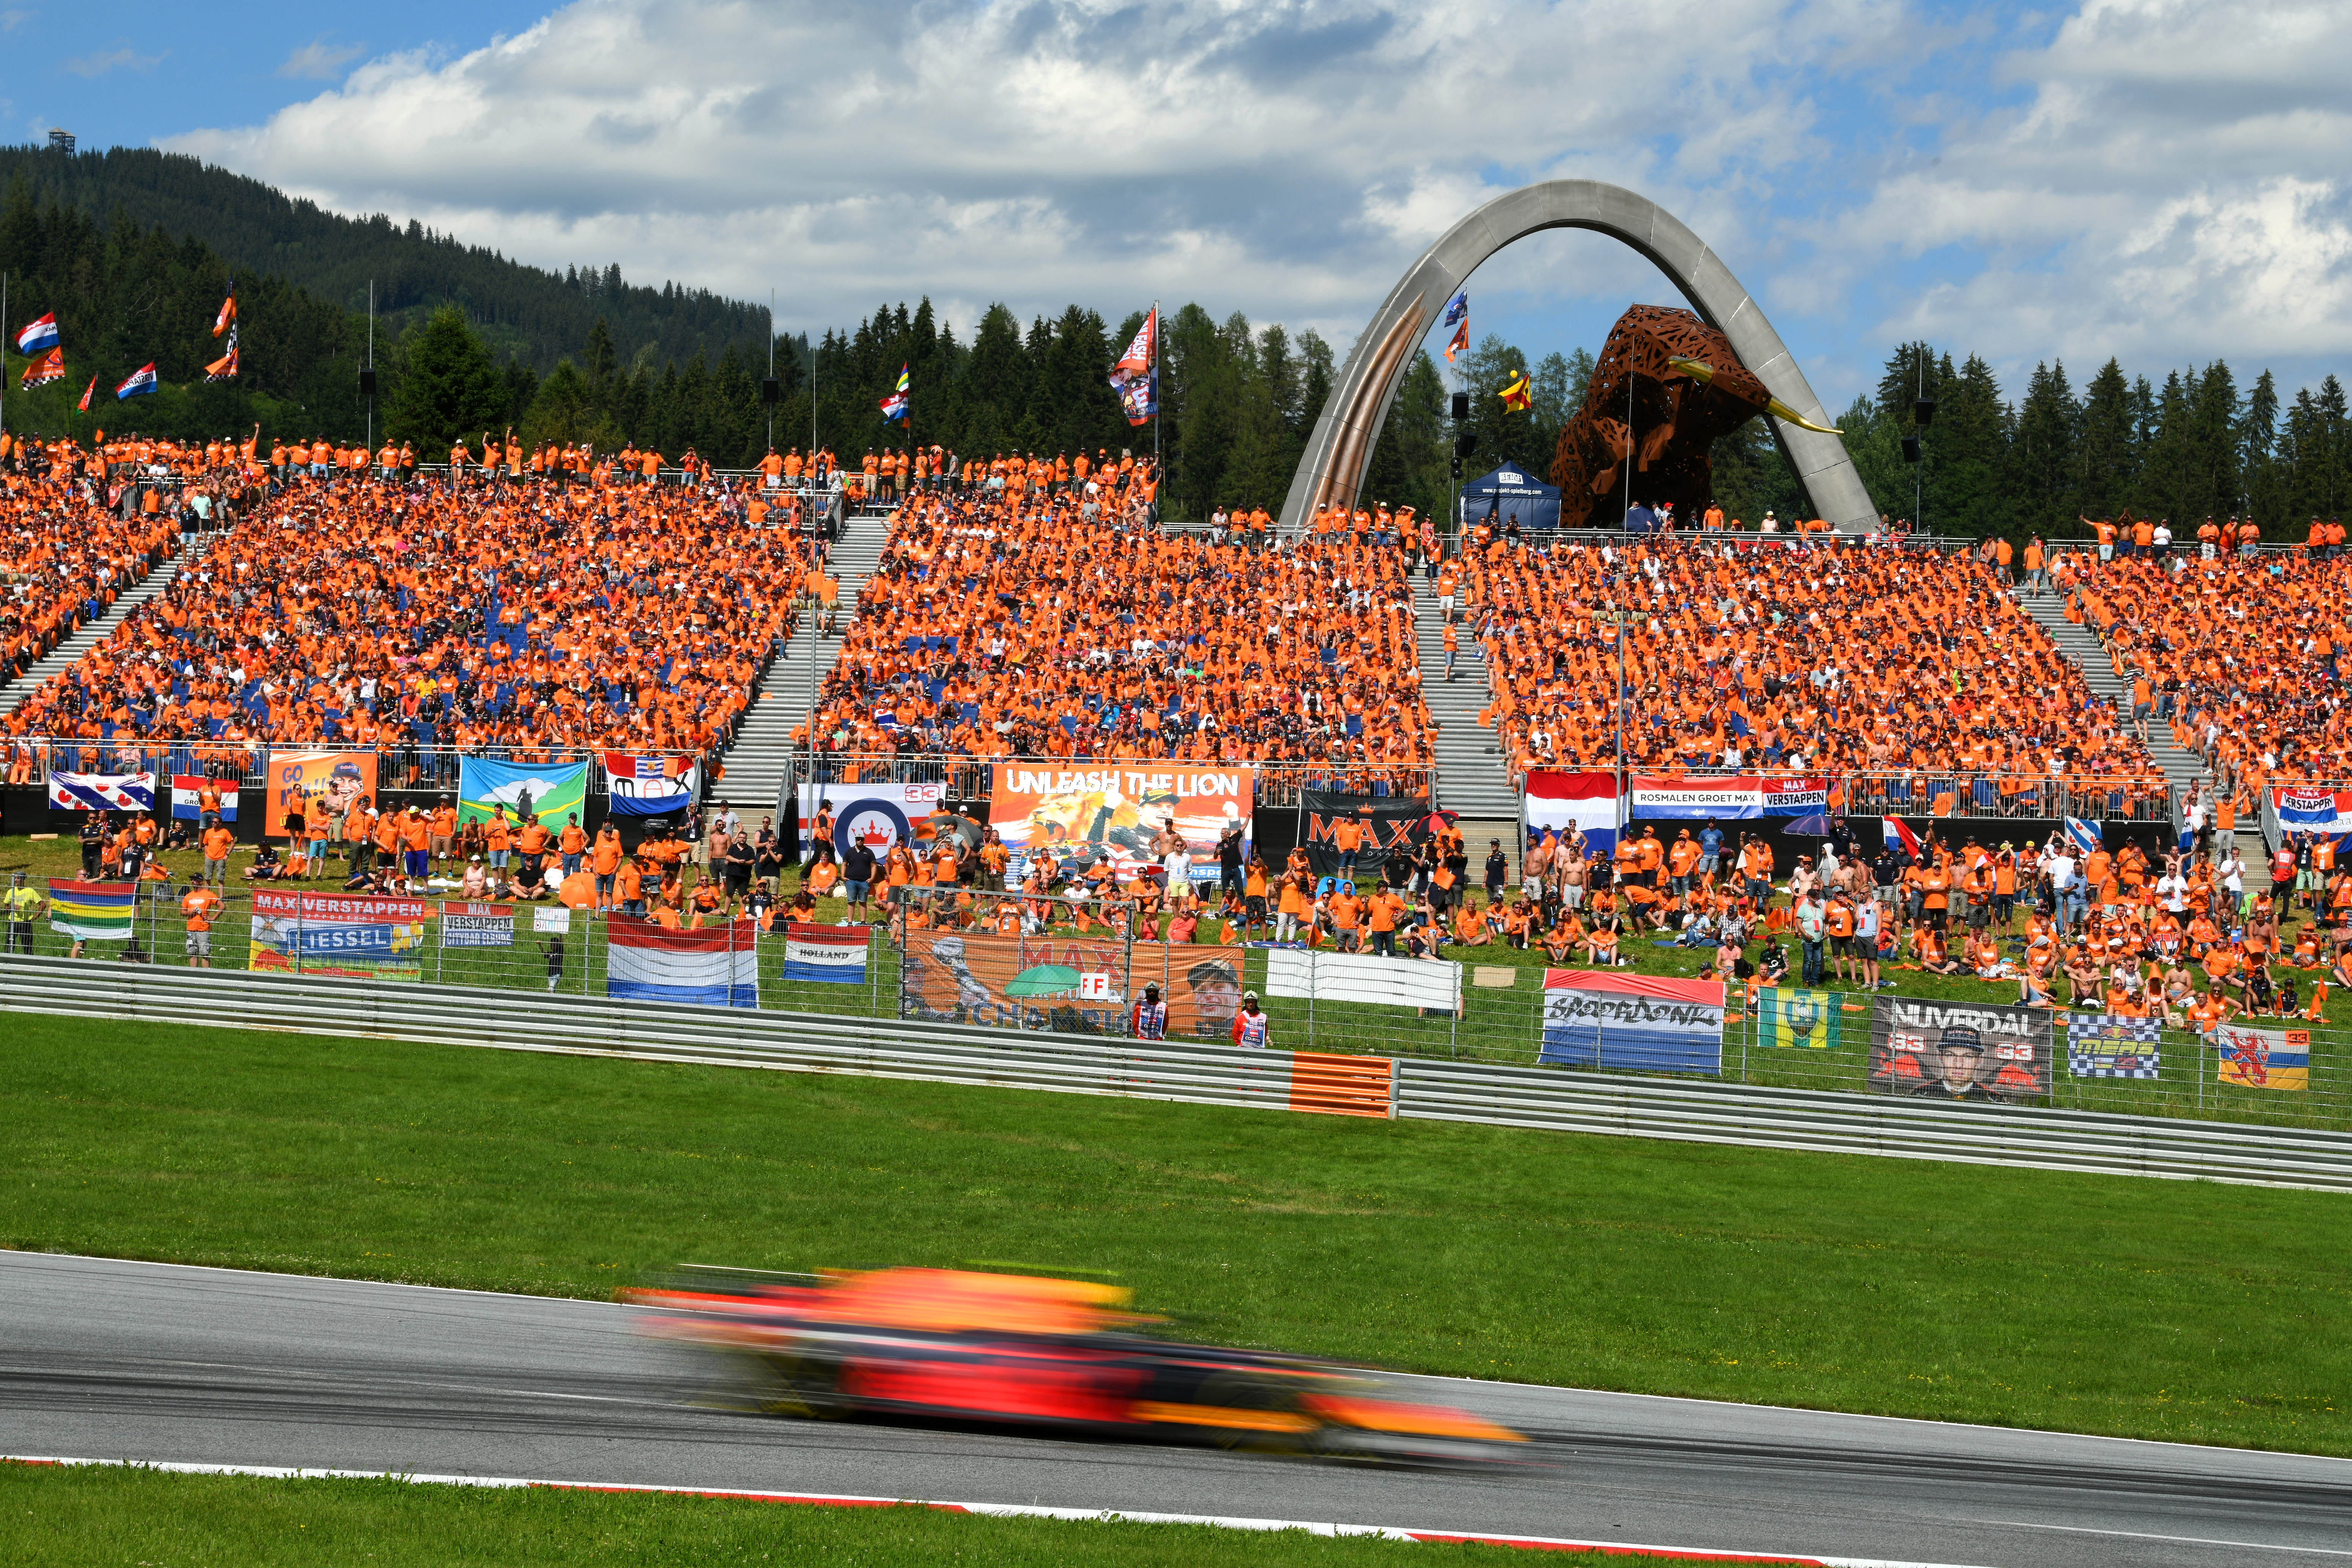 Tol Reserve toonhoogte The Max Factor: How Verstappen's fans have changed F1 | F1 | Feature